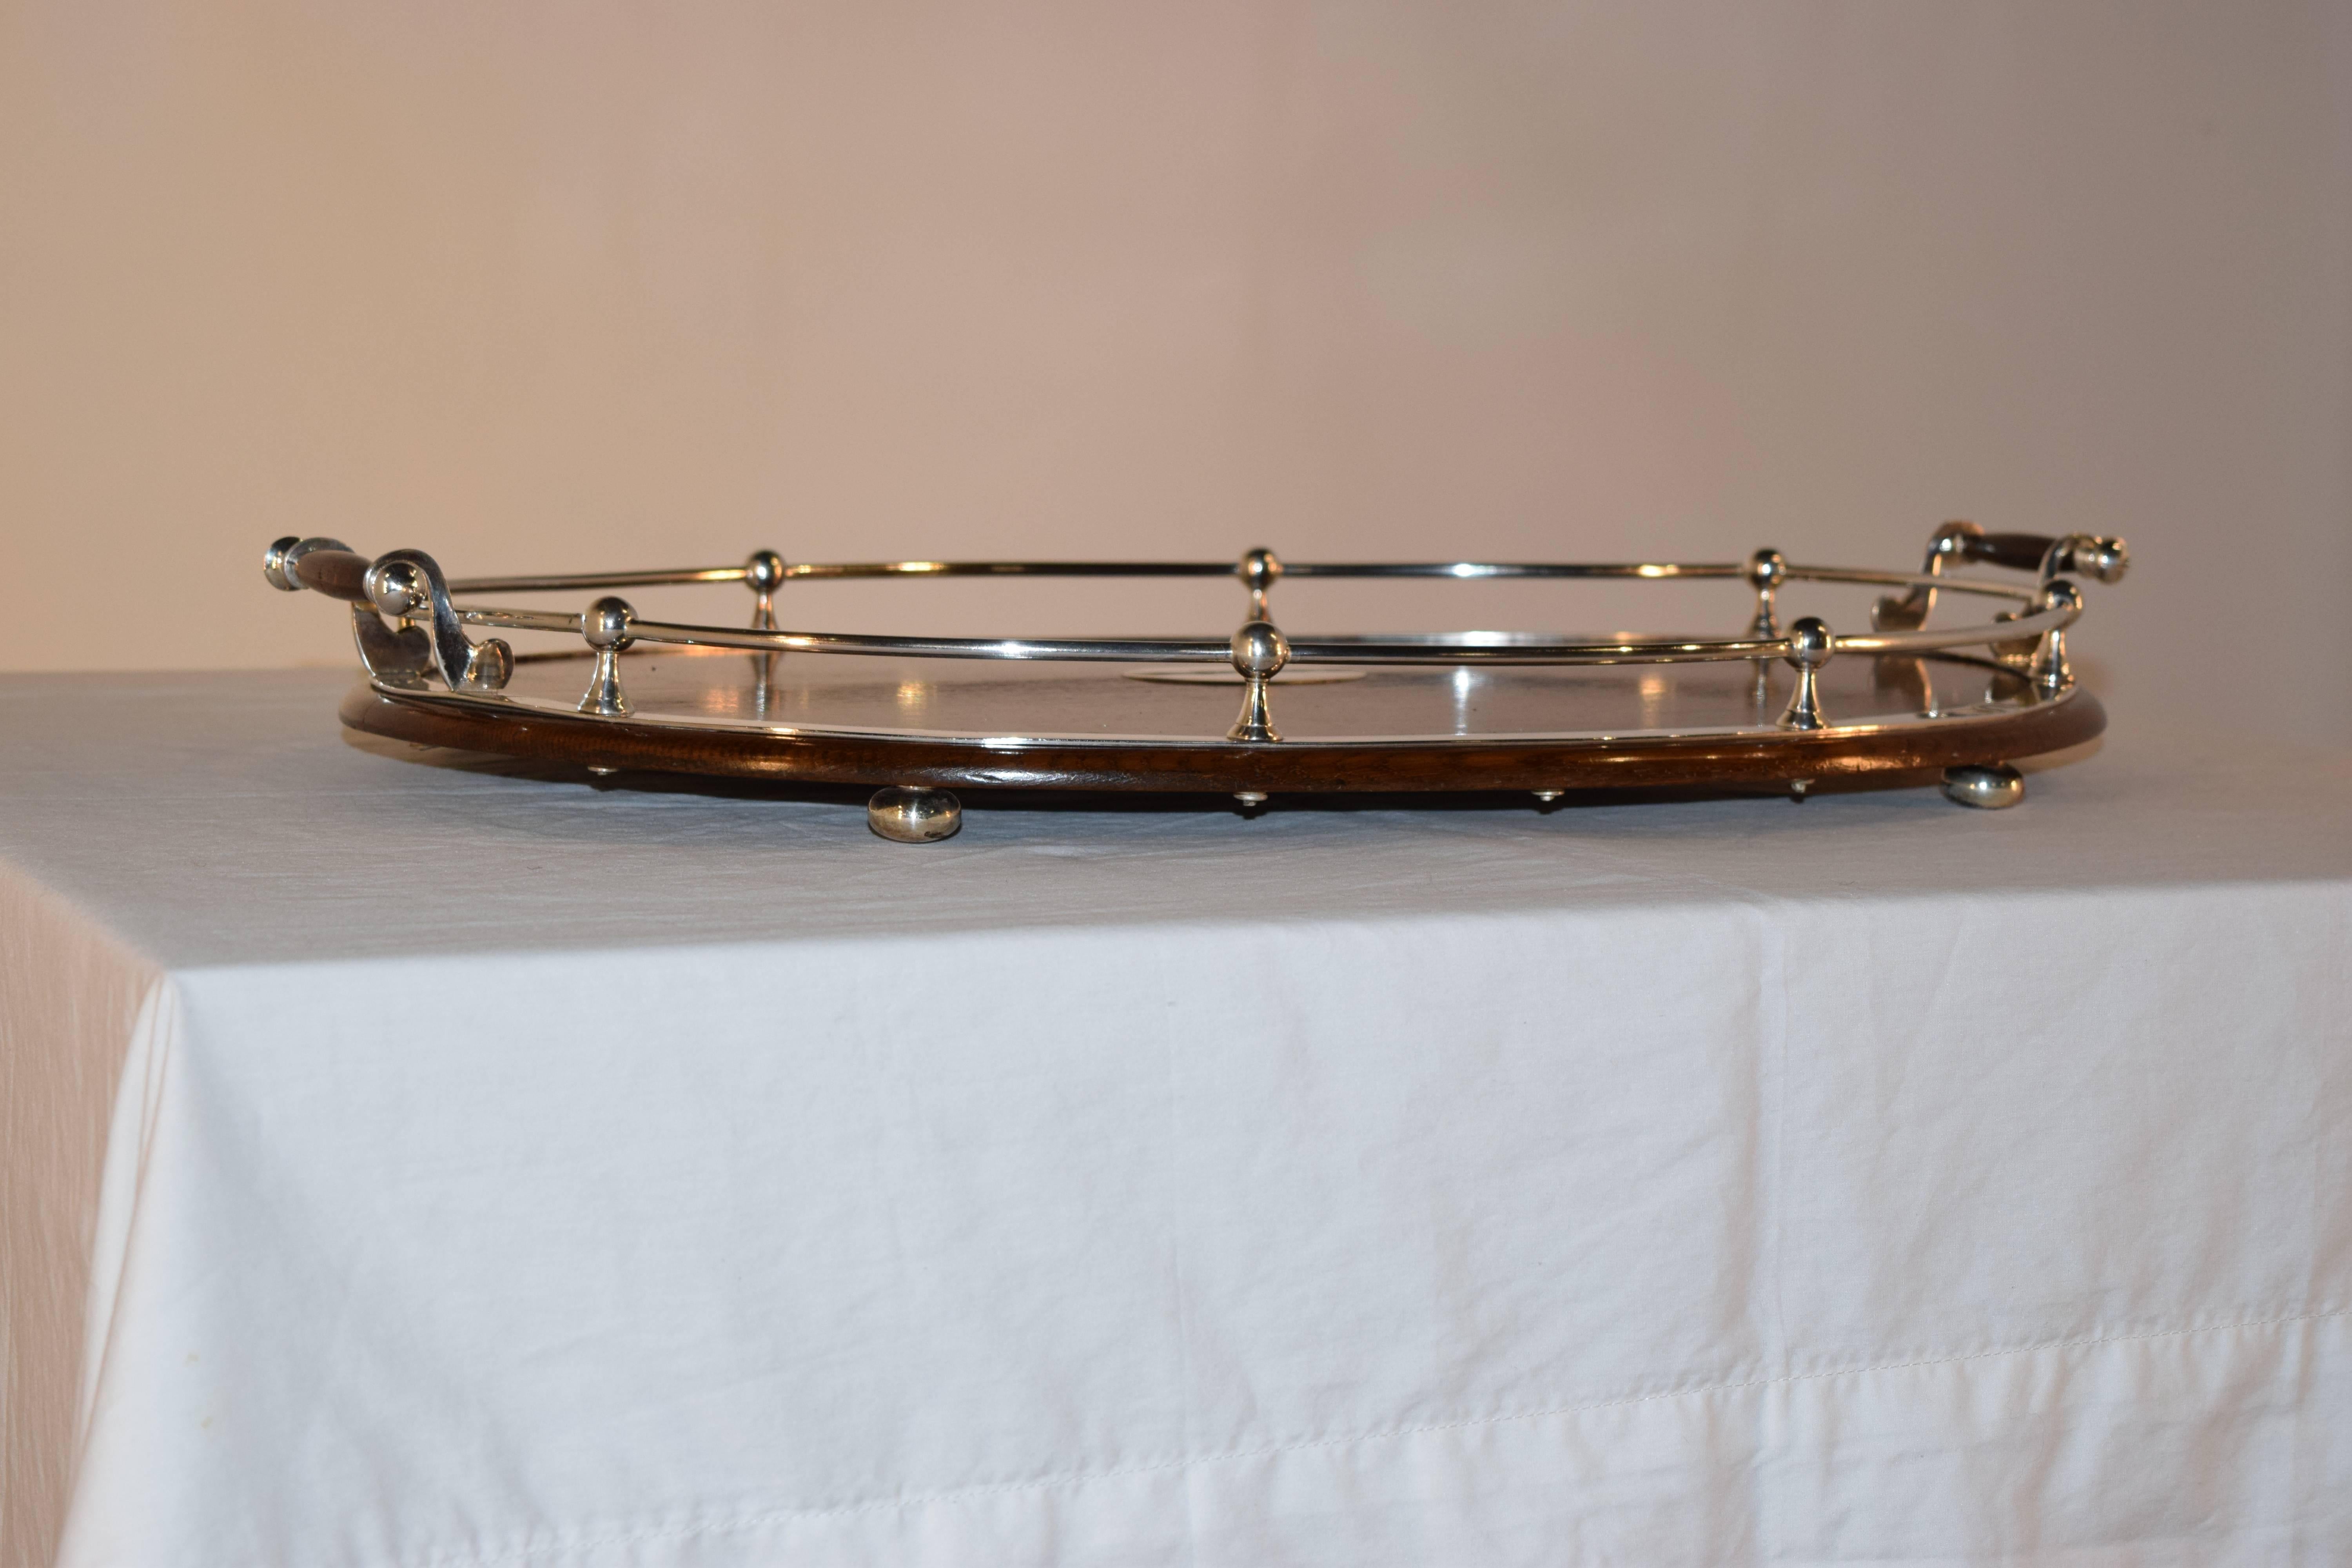 Late 19th century silver plate banded tray from England. The tray is made from oak and has a central silver plate plaque and banded around the edge, with an attached gallery as well. The tray is supported on silver plated bun feet.